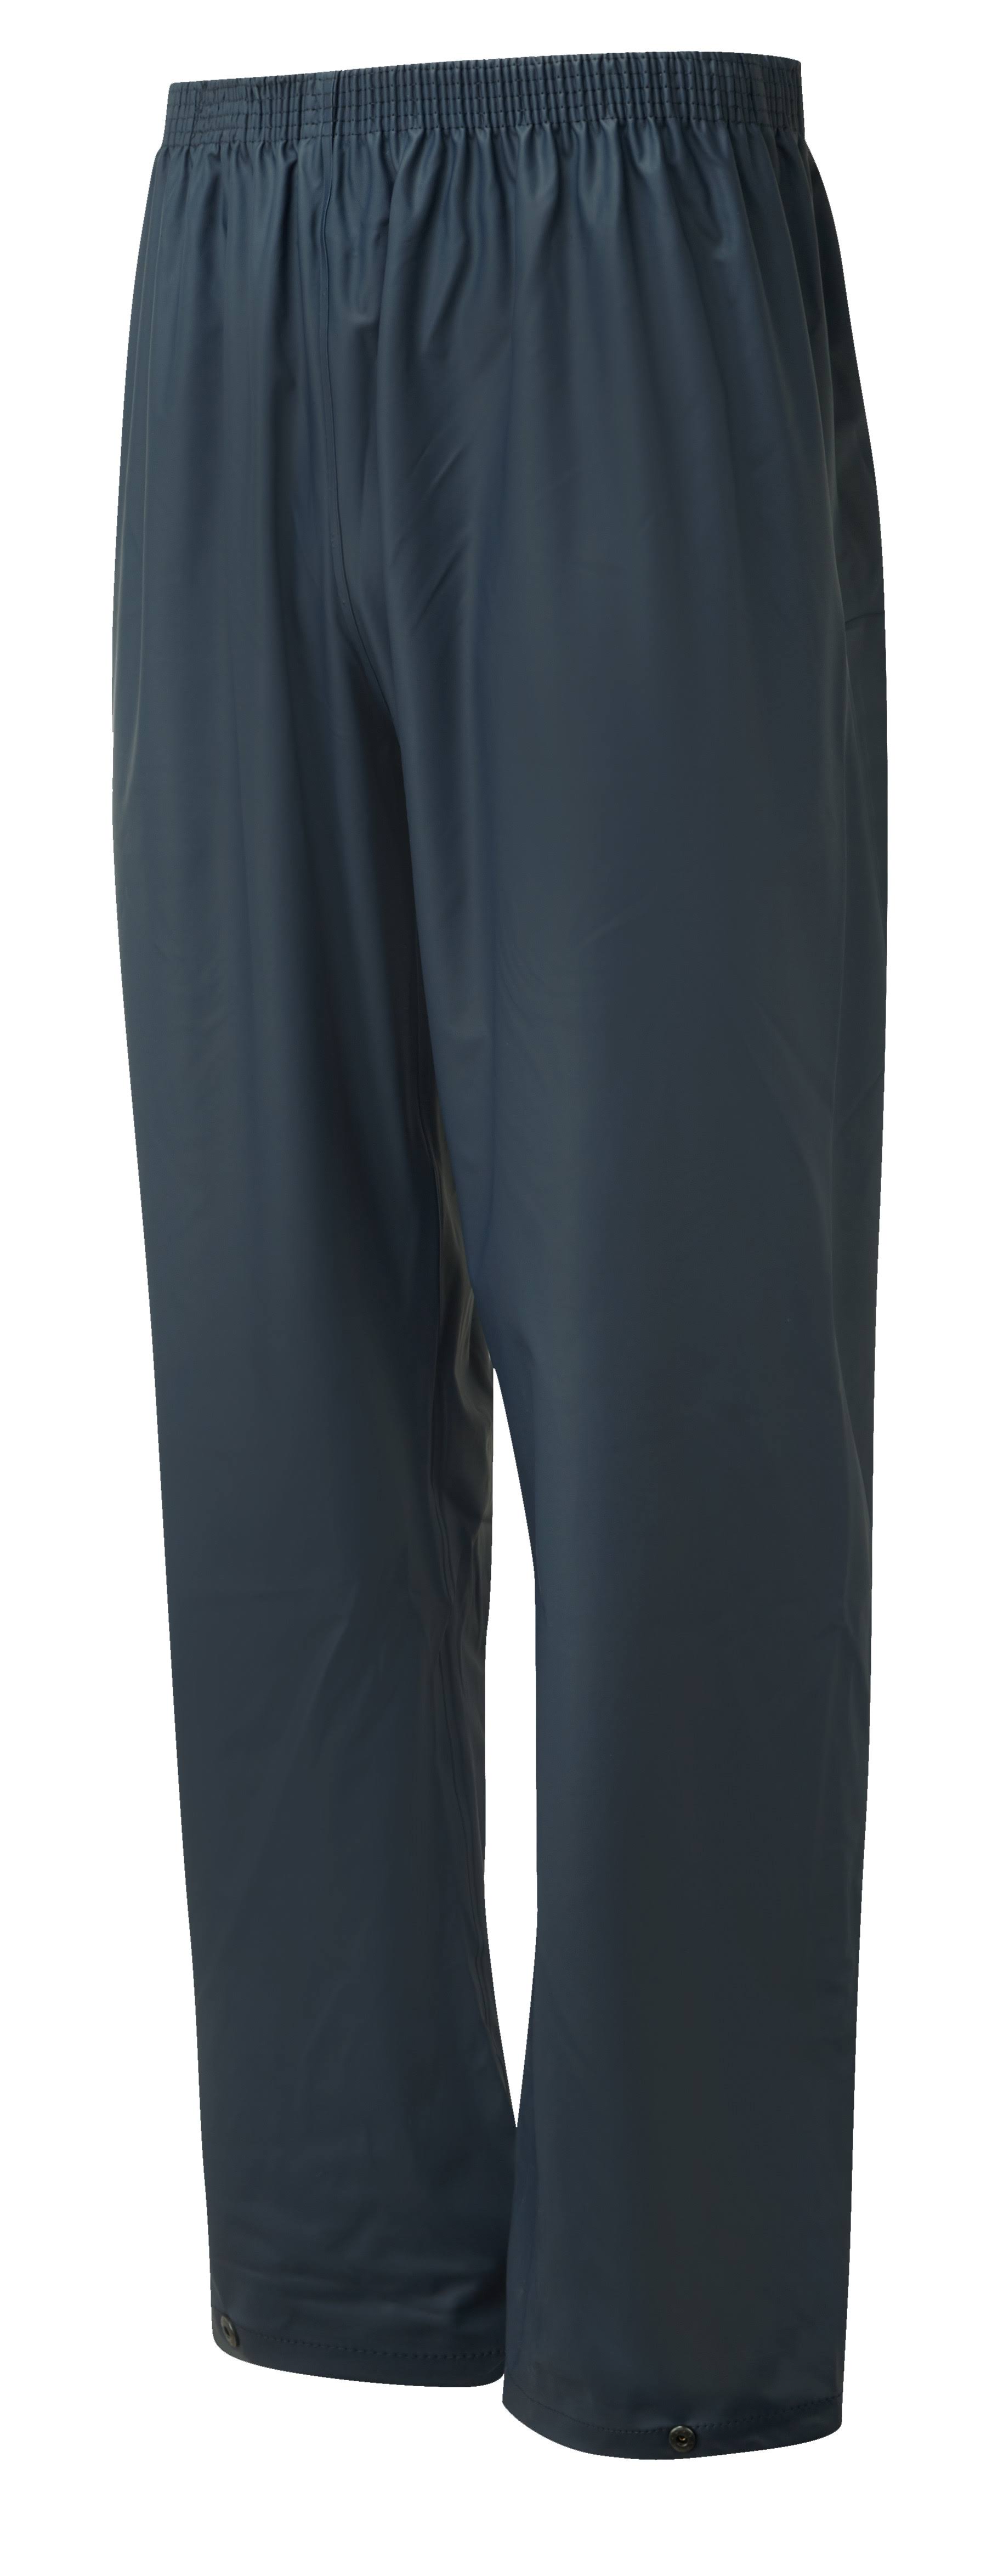 Fort Airflex Waterproof Trousers - 921 Navy / 3X-Large